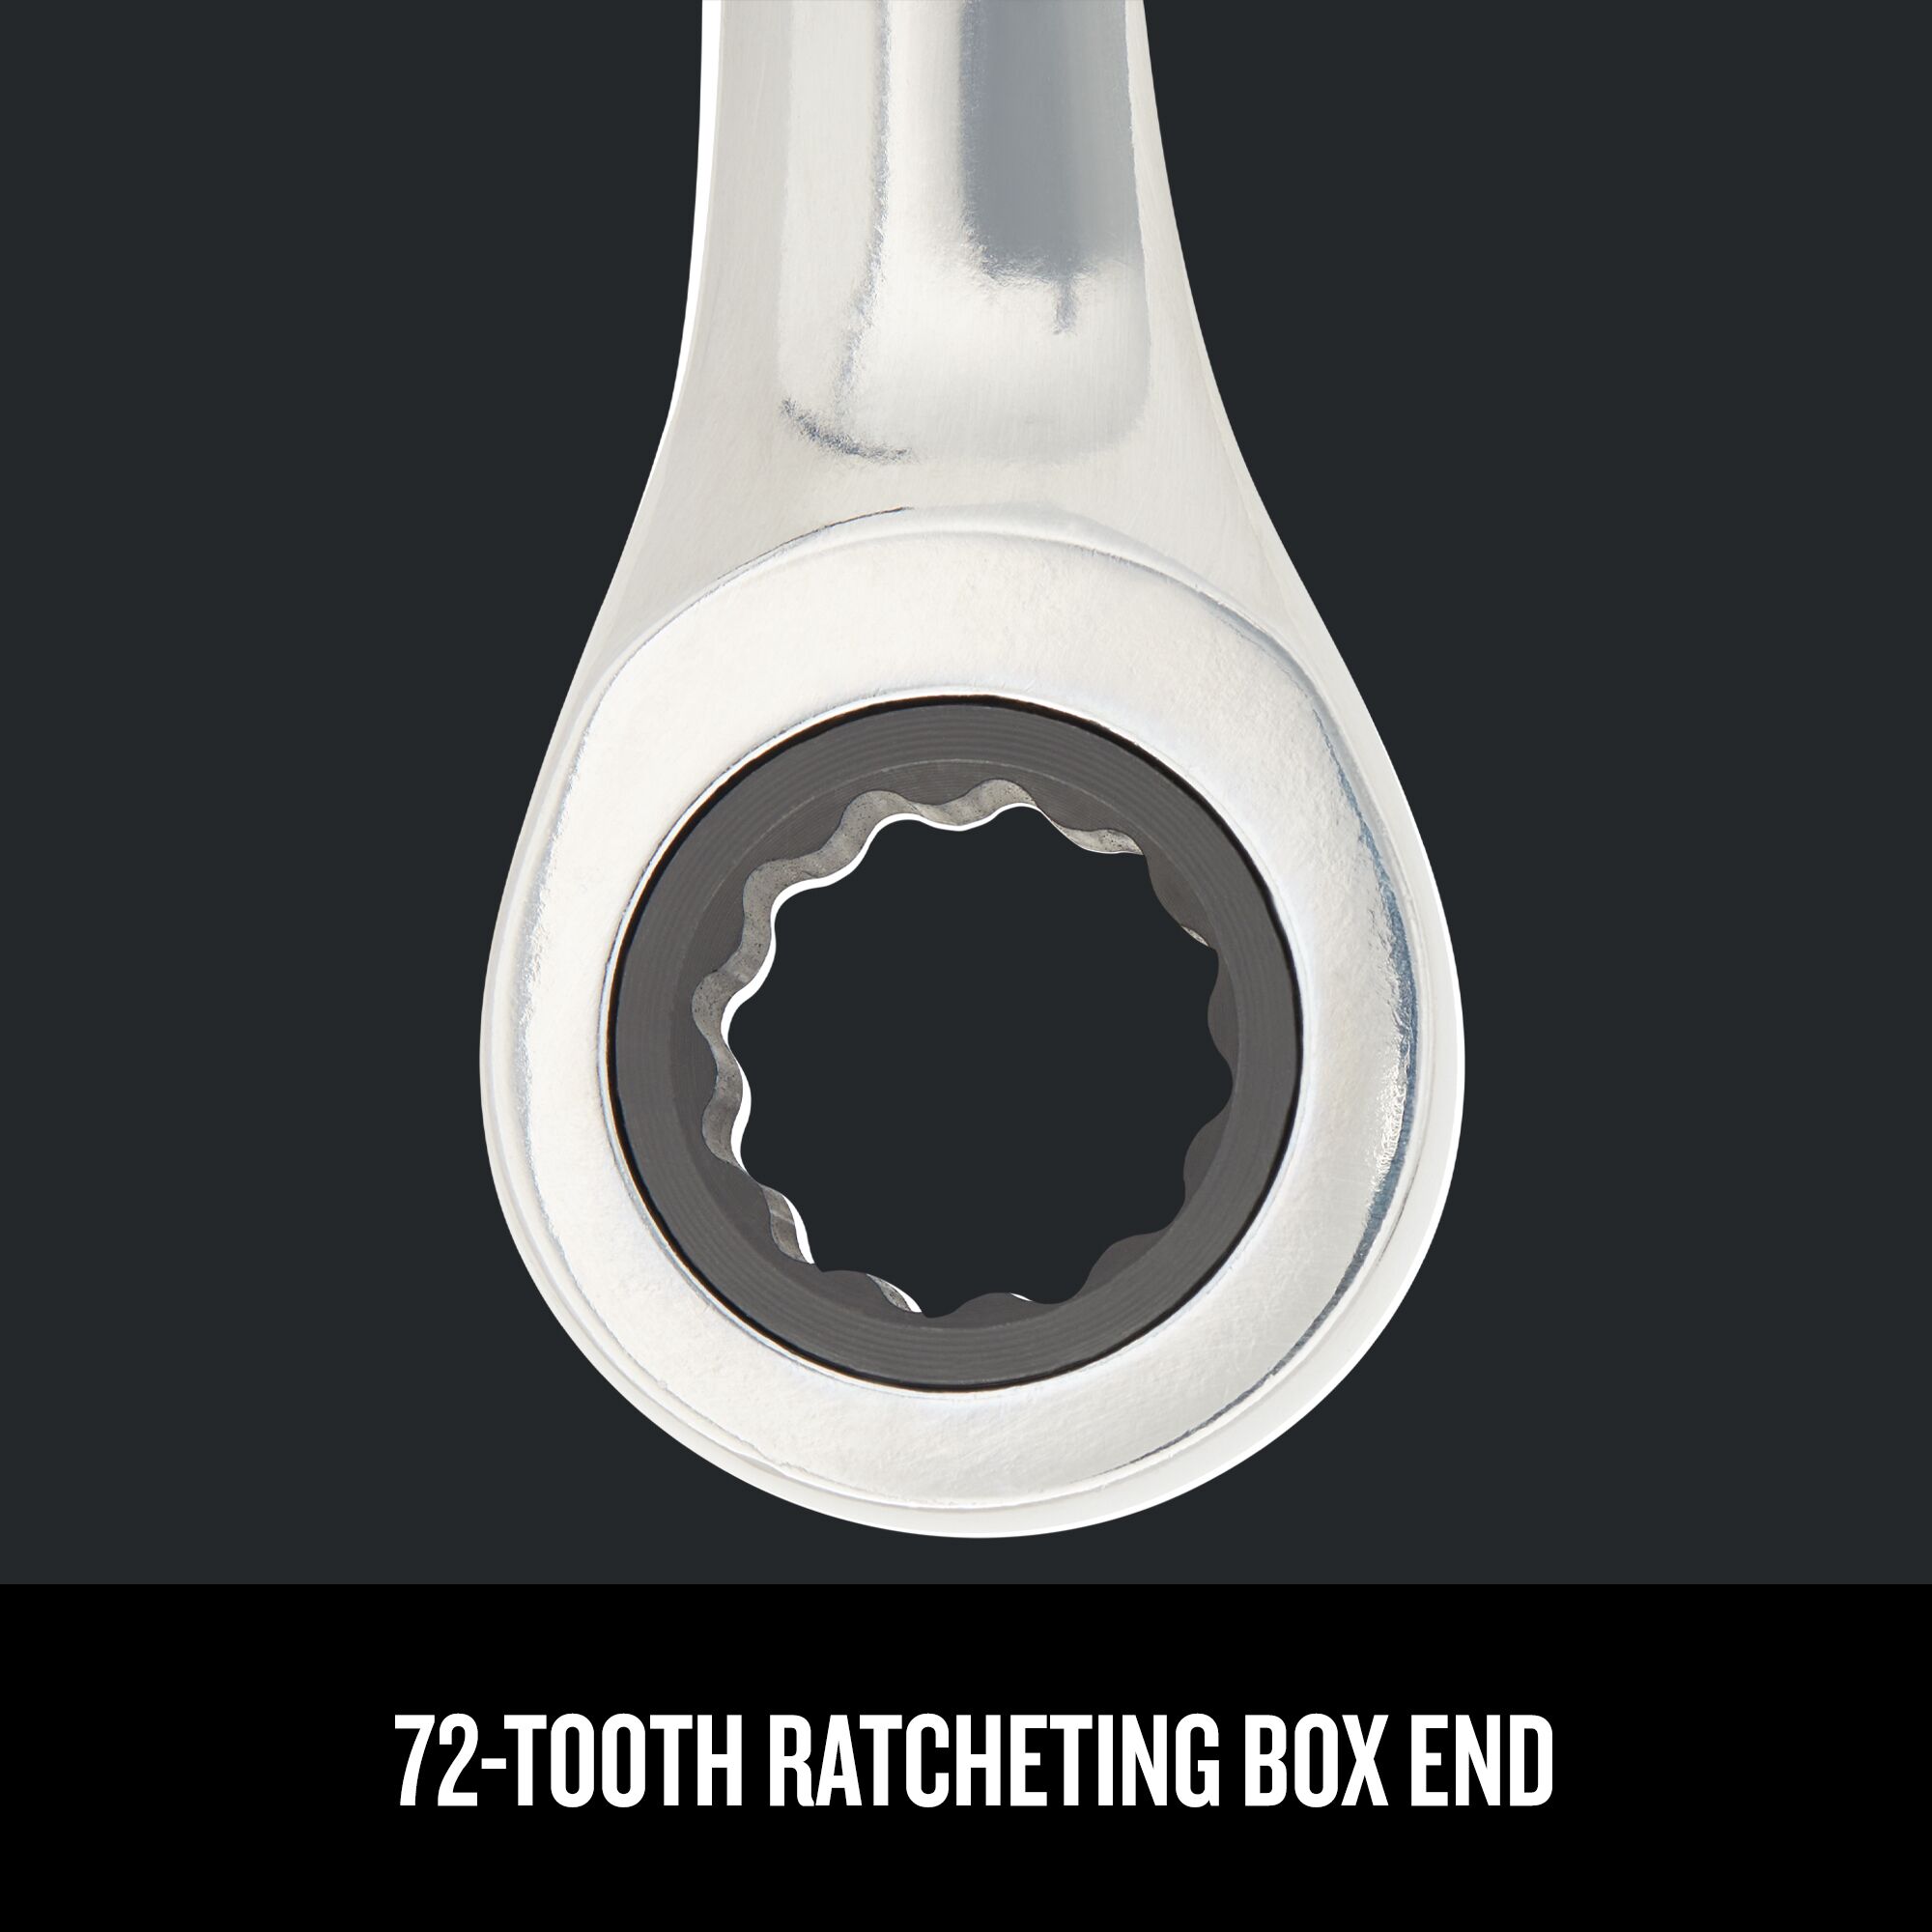 Close-up view of Craftsman 12 pt. Metric Ratchet Wrench box end showing 72-tooth ratcheting box end